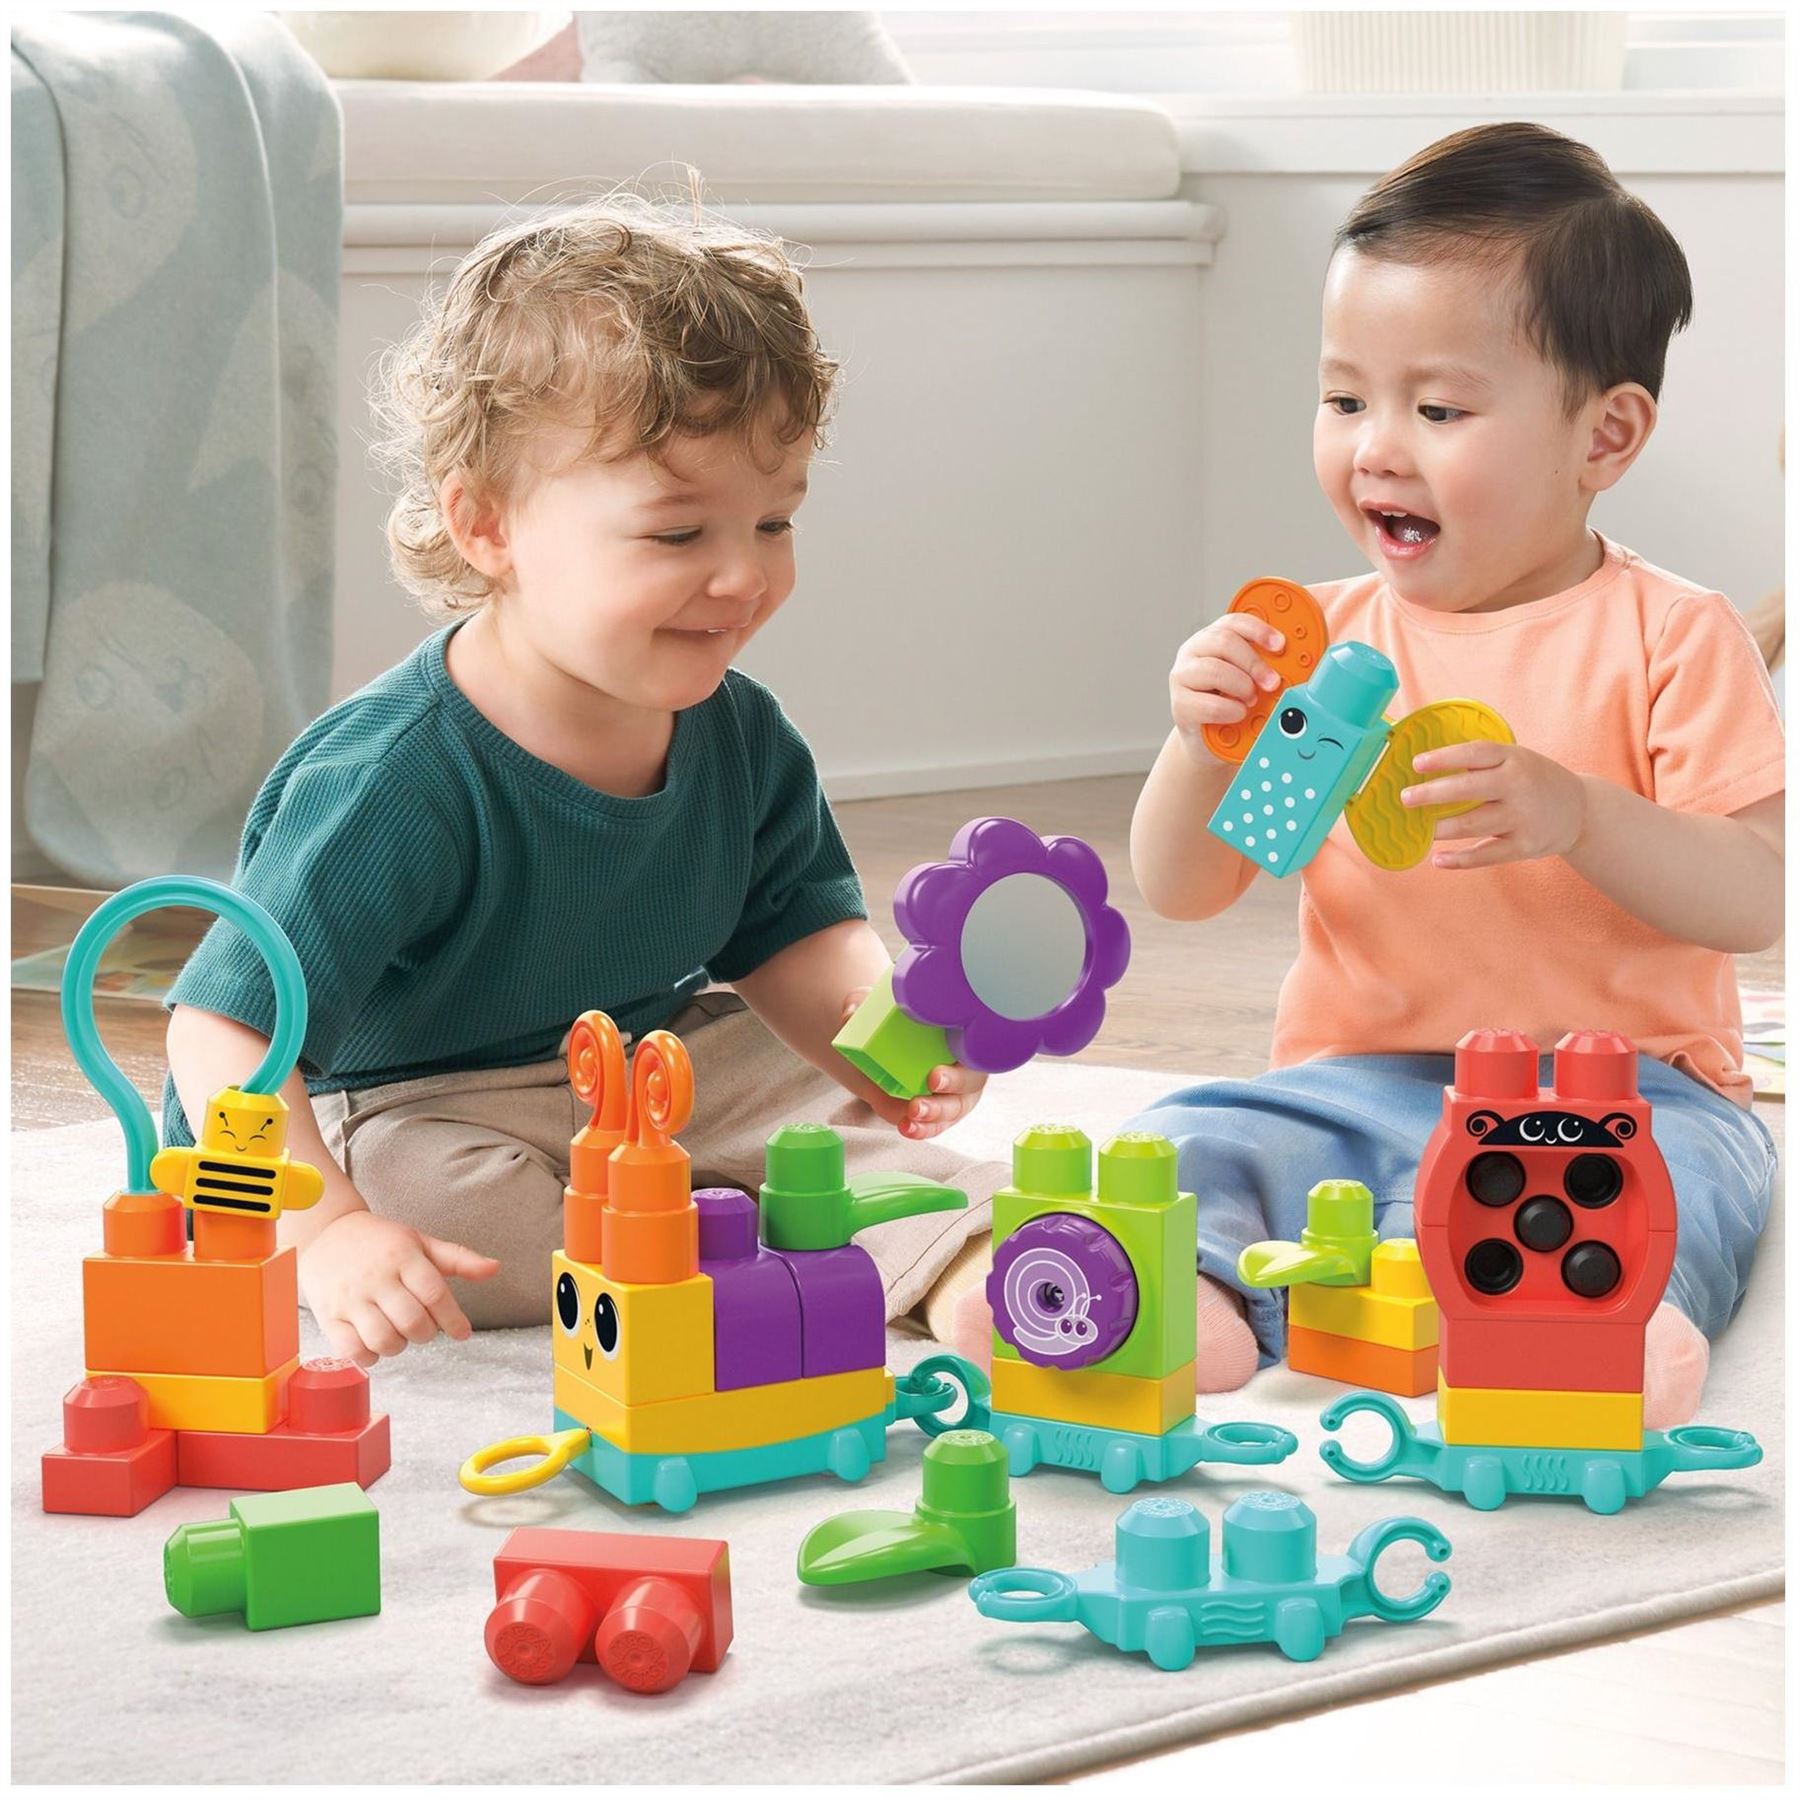 Move N Groove Caterpillar Sensory Toy